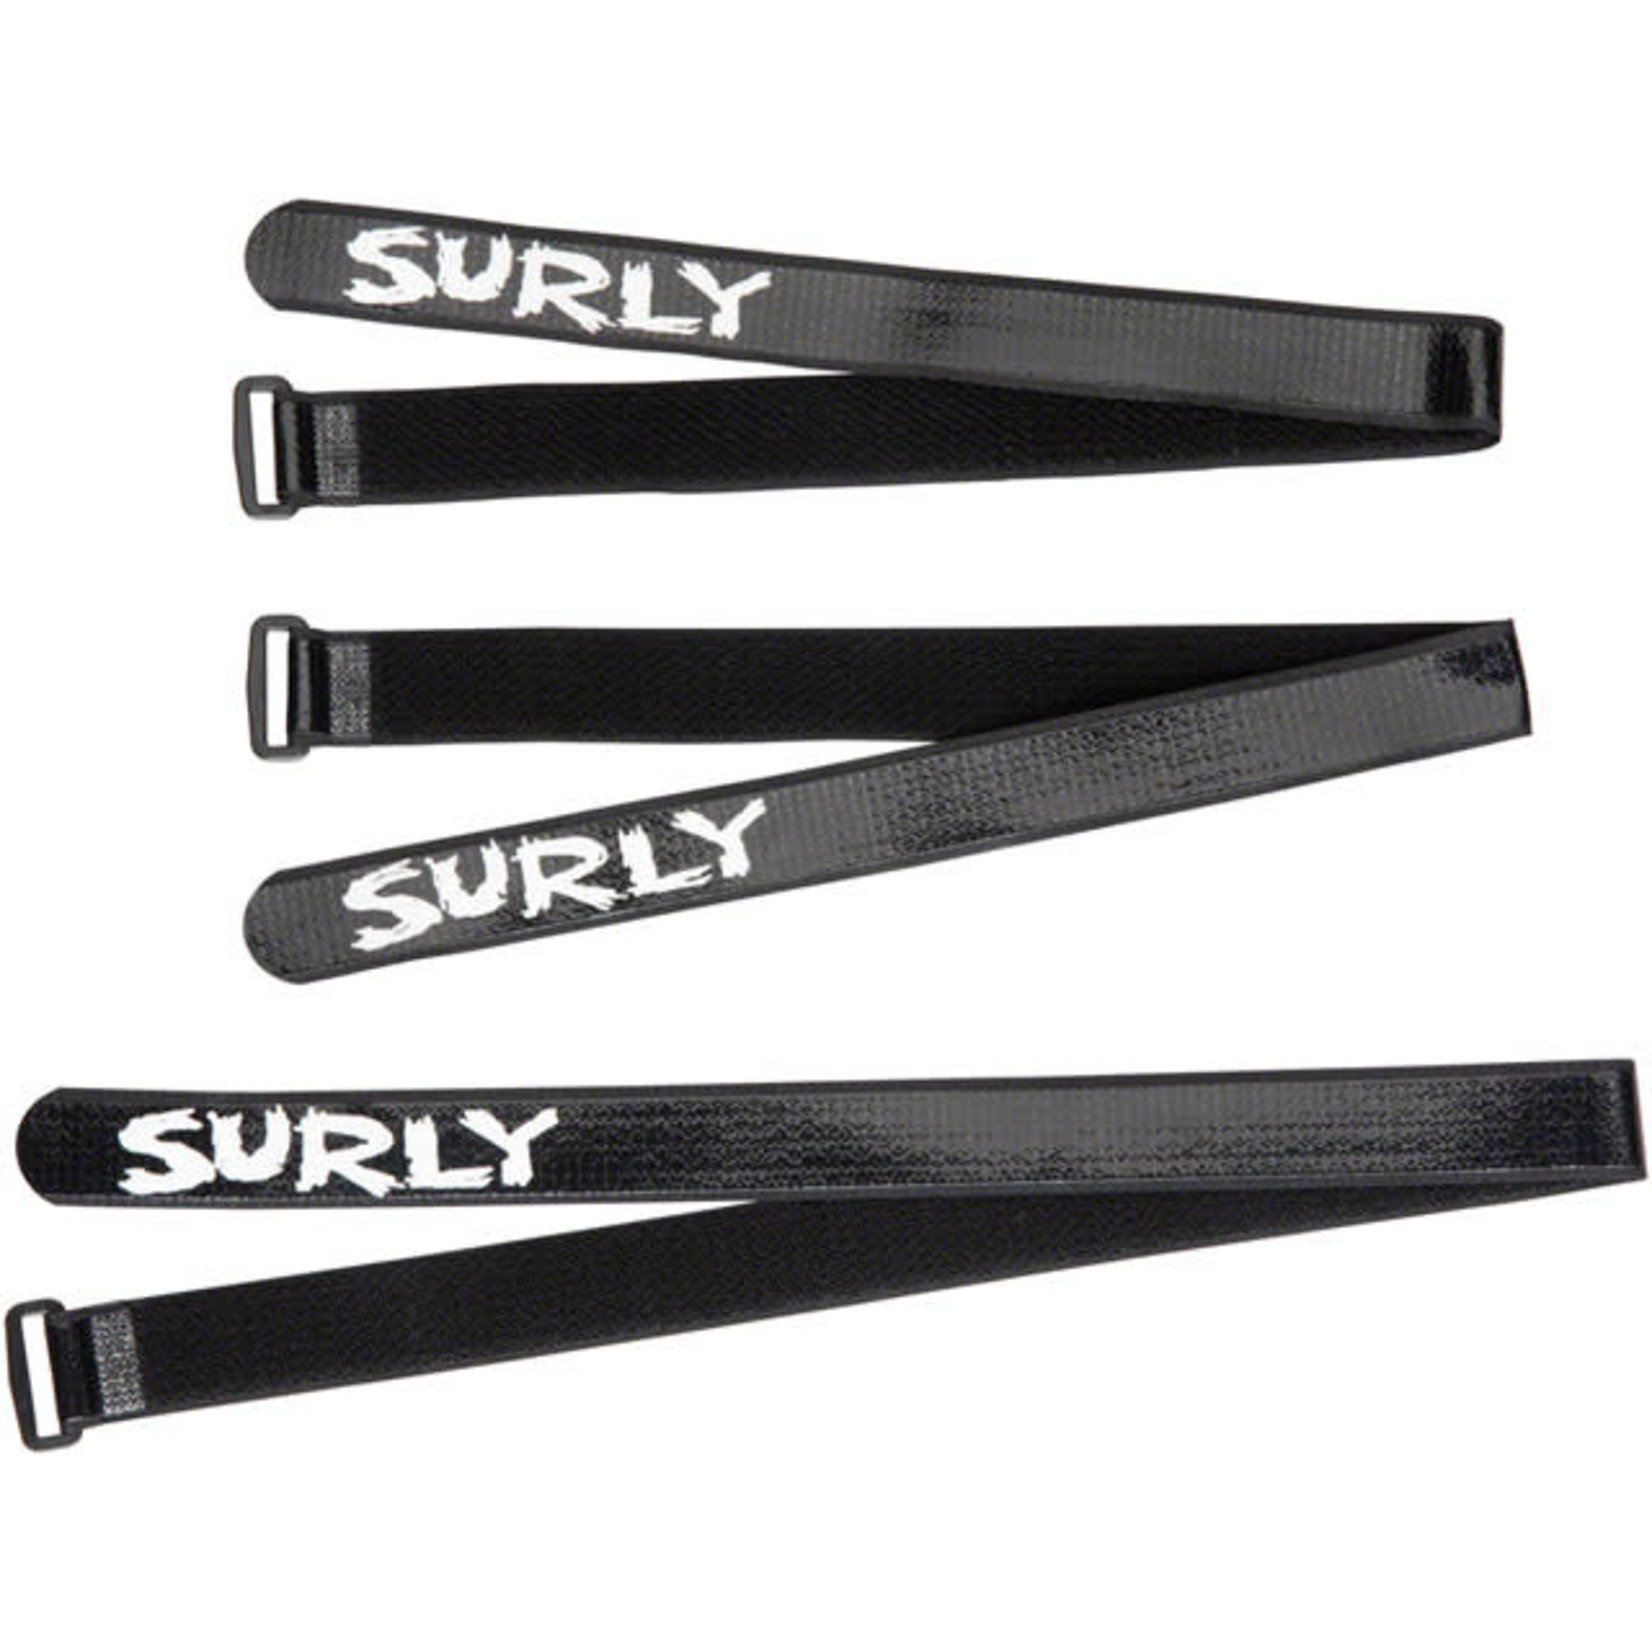 Surly Whip Lash Gear Strap Multi-Pack